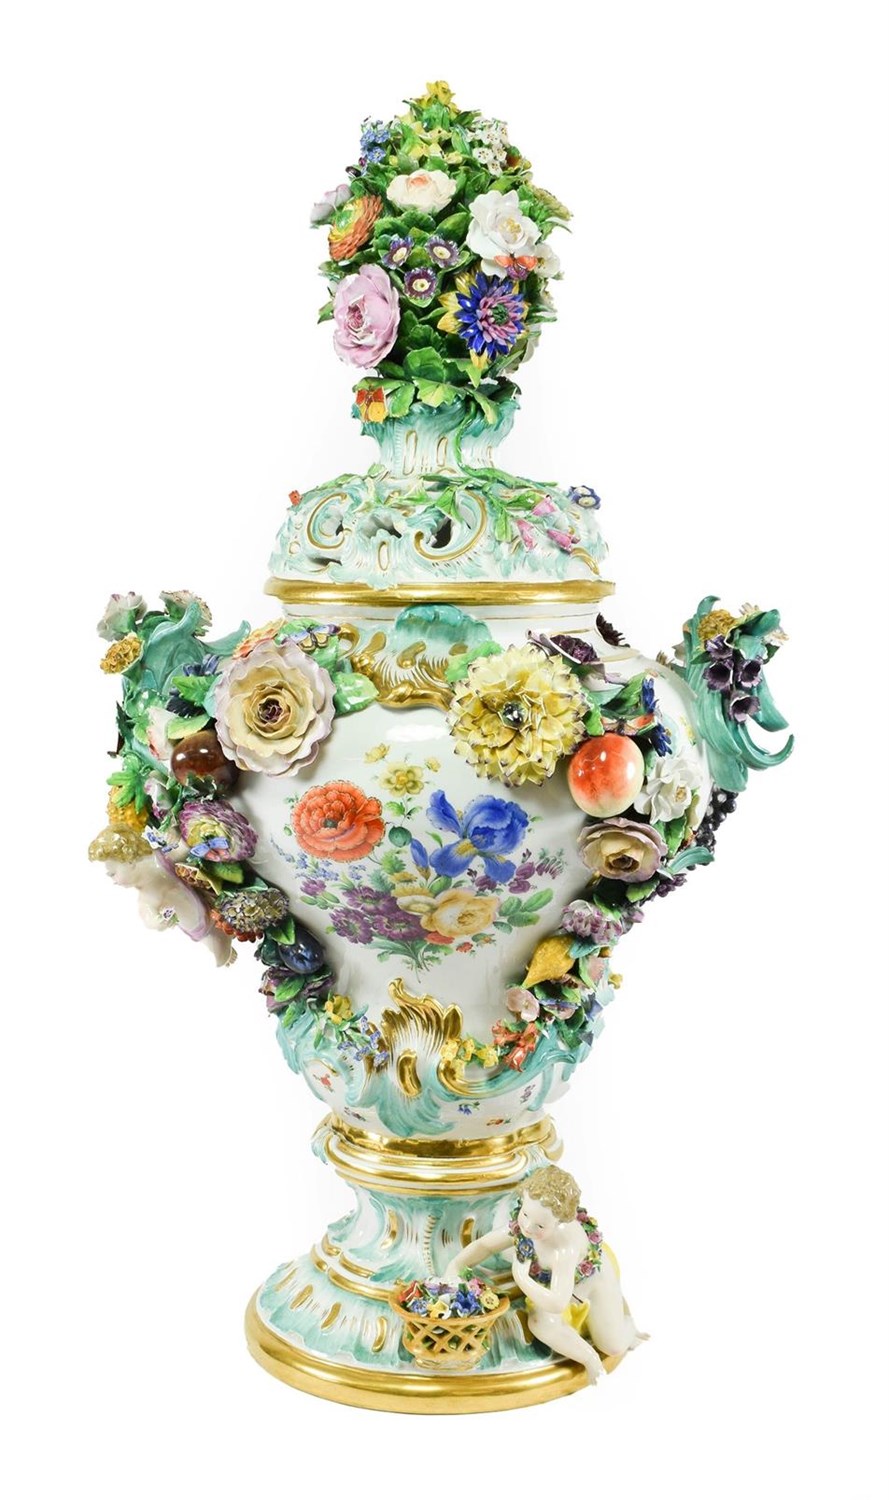 Lot 53 - A Meissen Porcelain Flower Encrusted Vase and Cover, late 19th/early 20th century, with floral knop